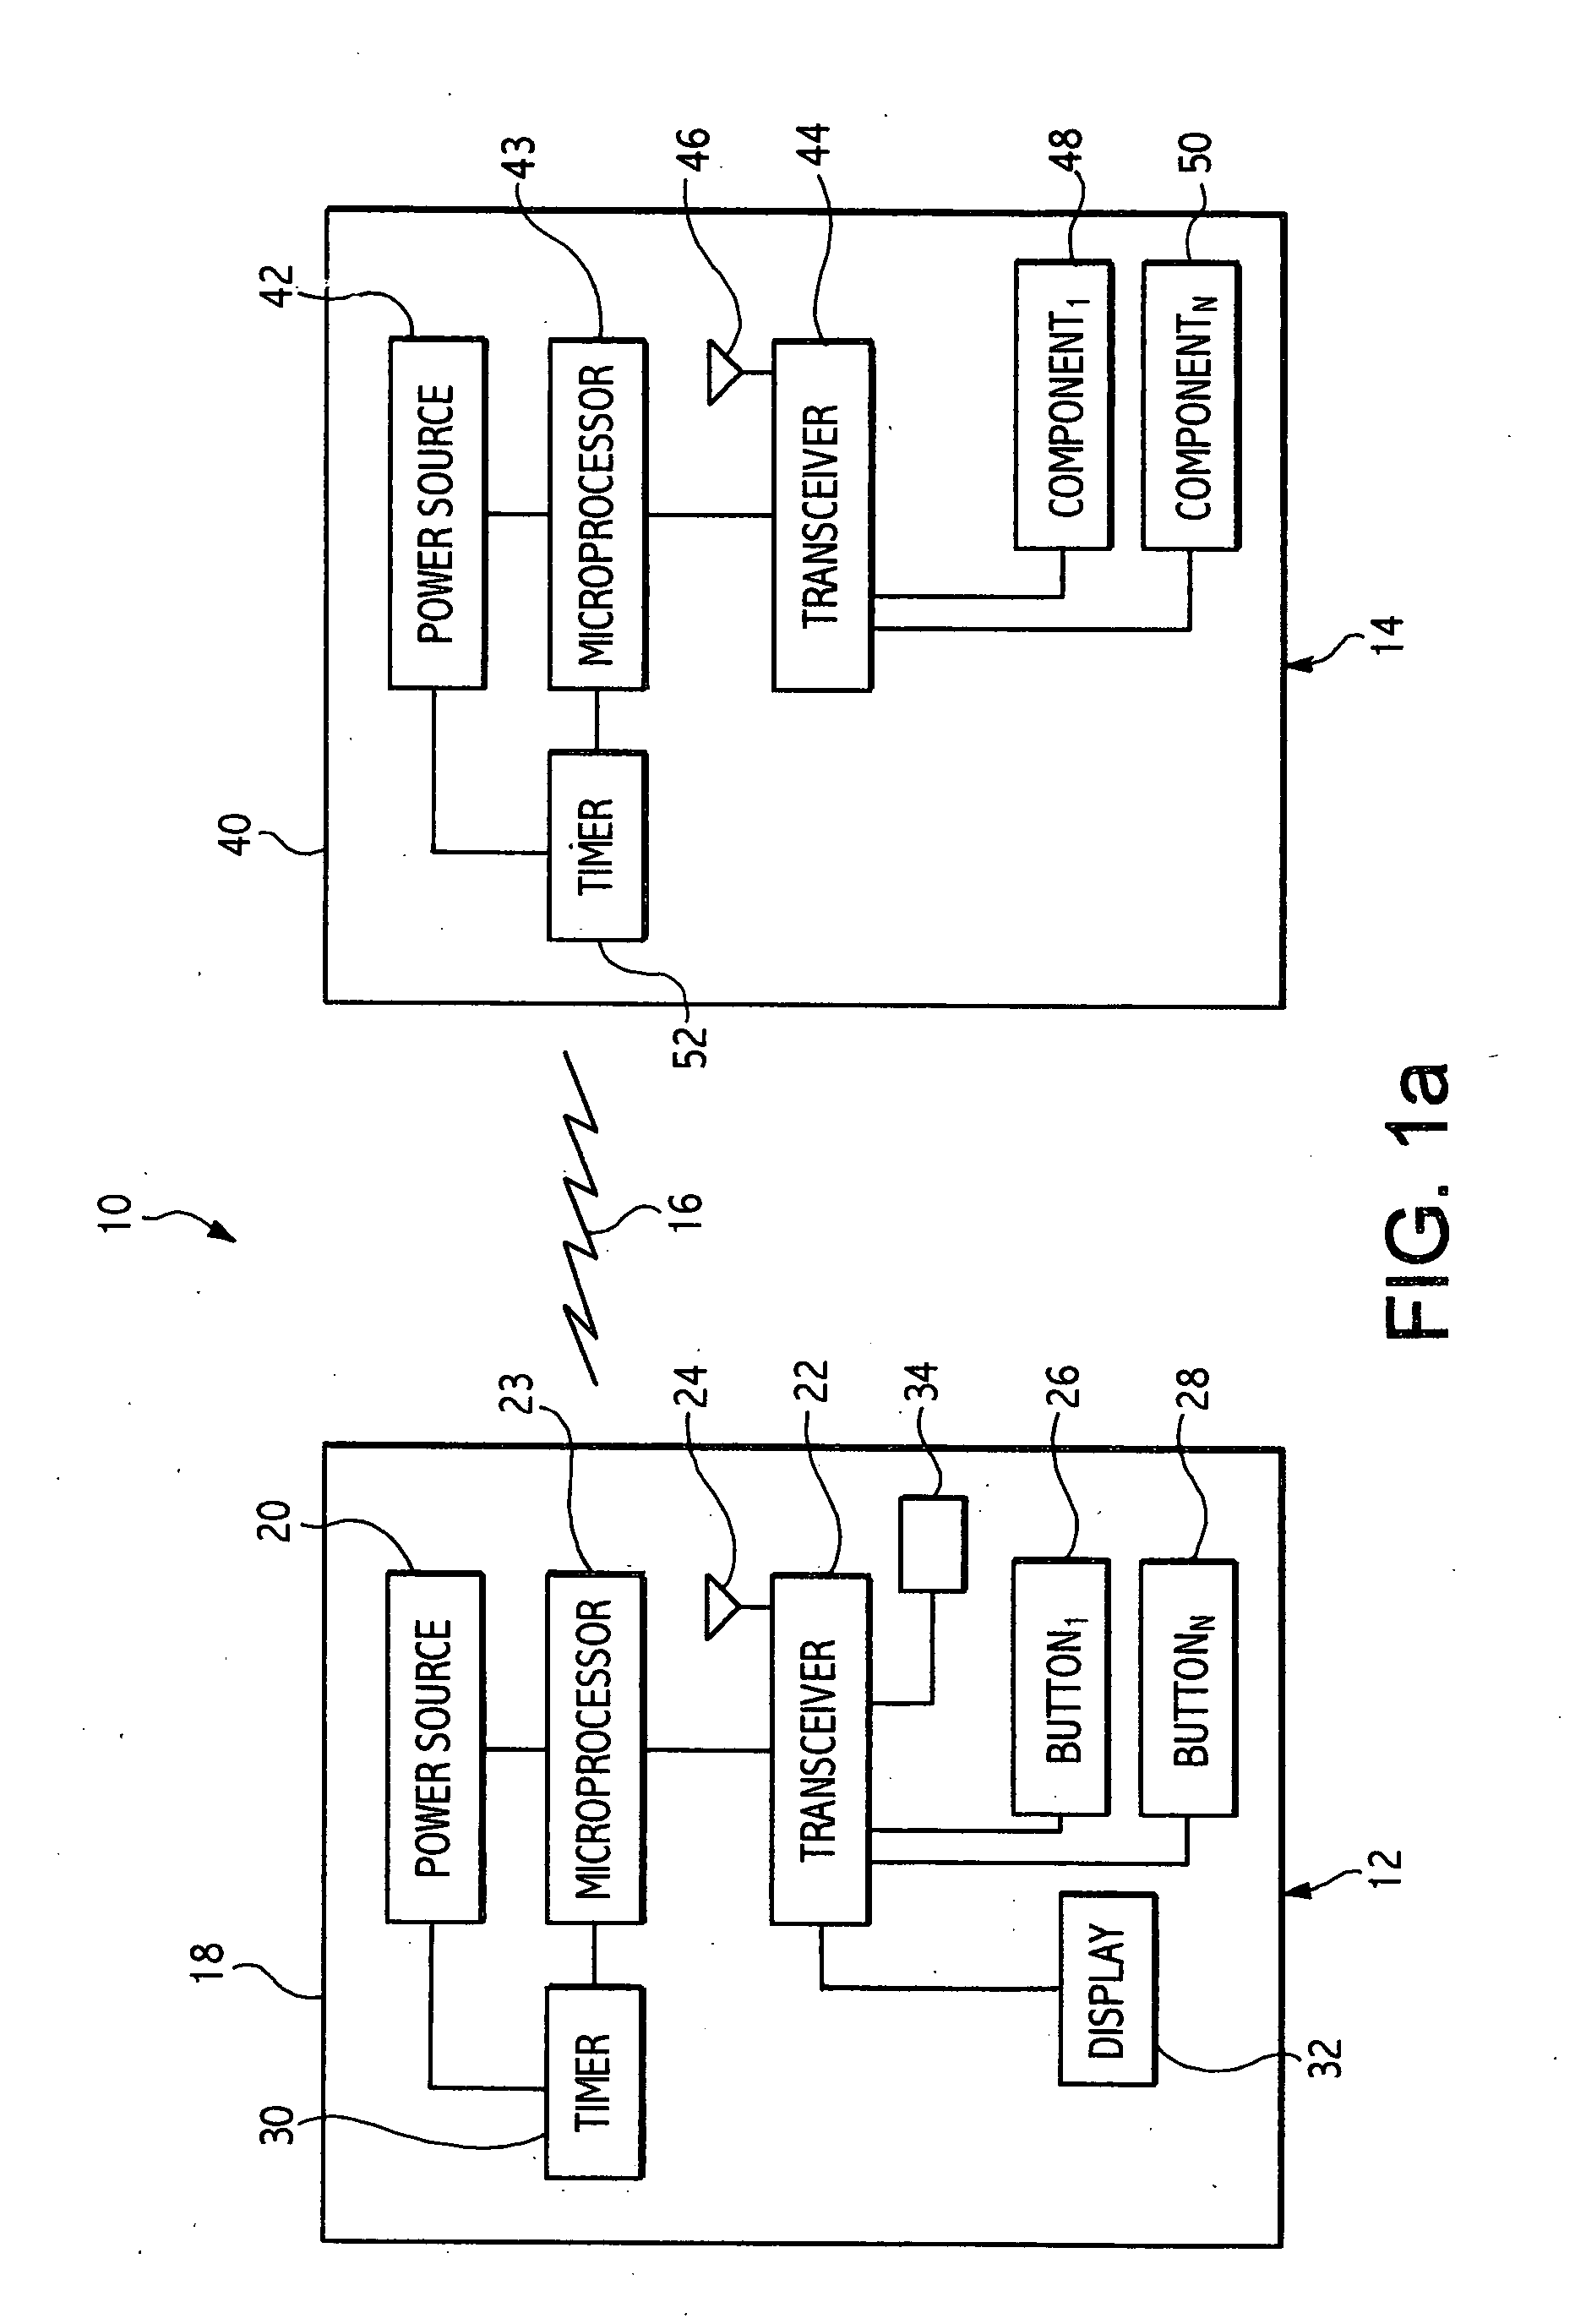 Vehicle two way remote communication system